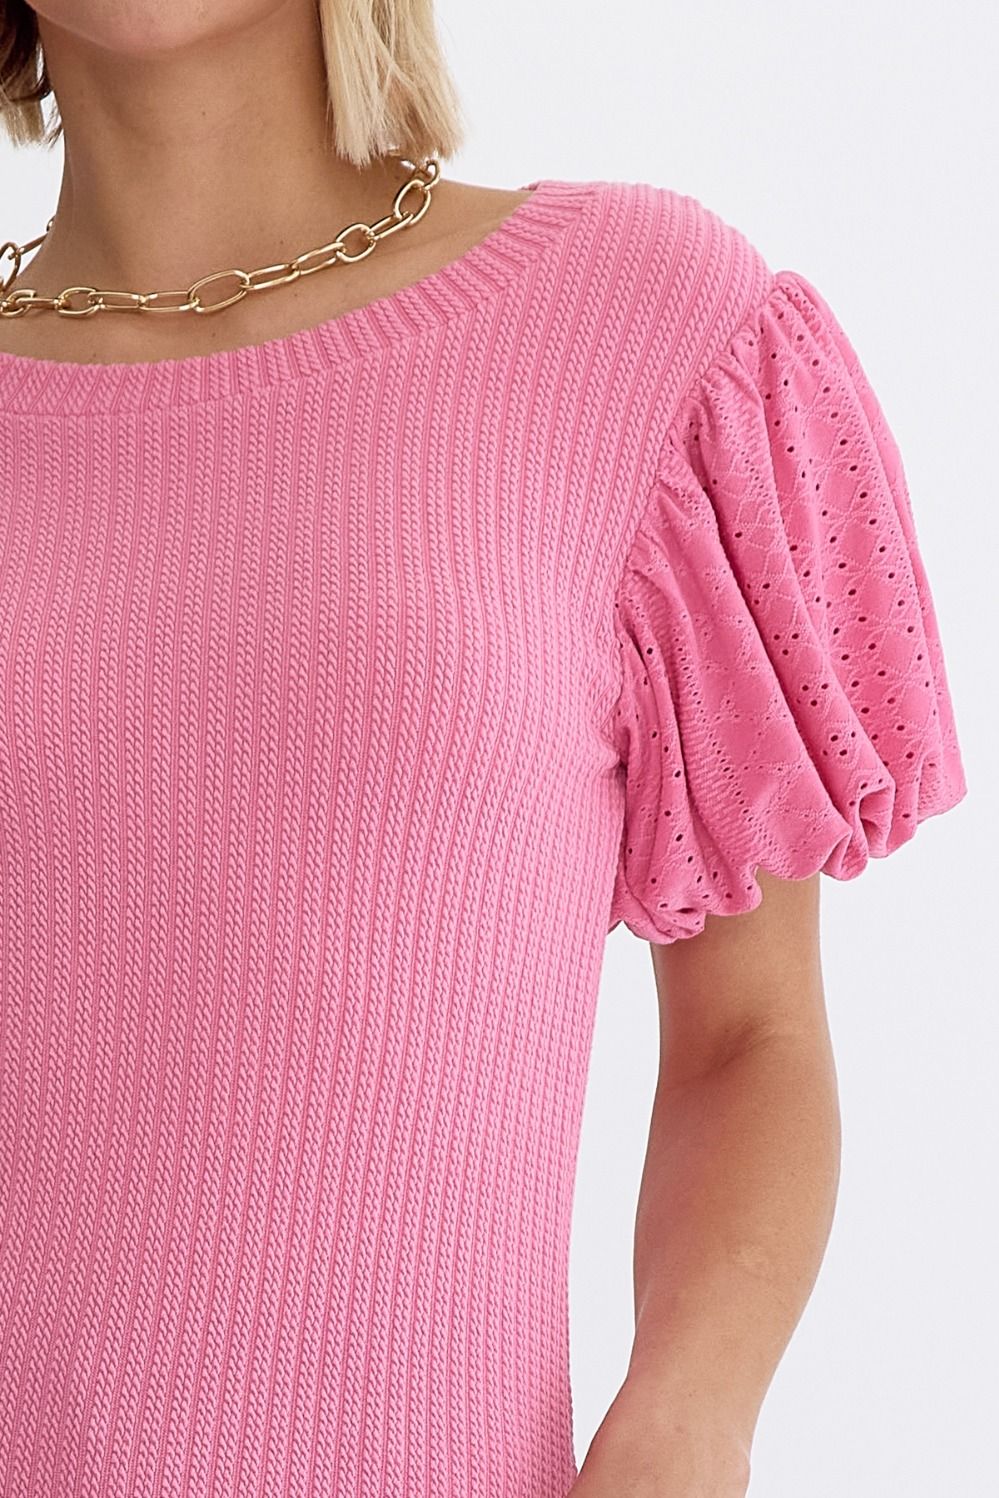 Carra Cable Knit Top